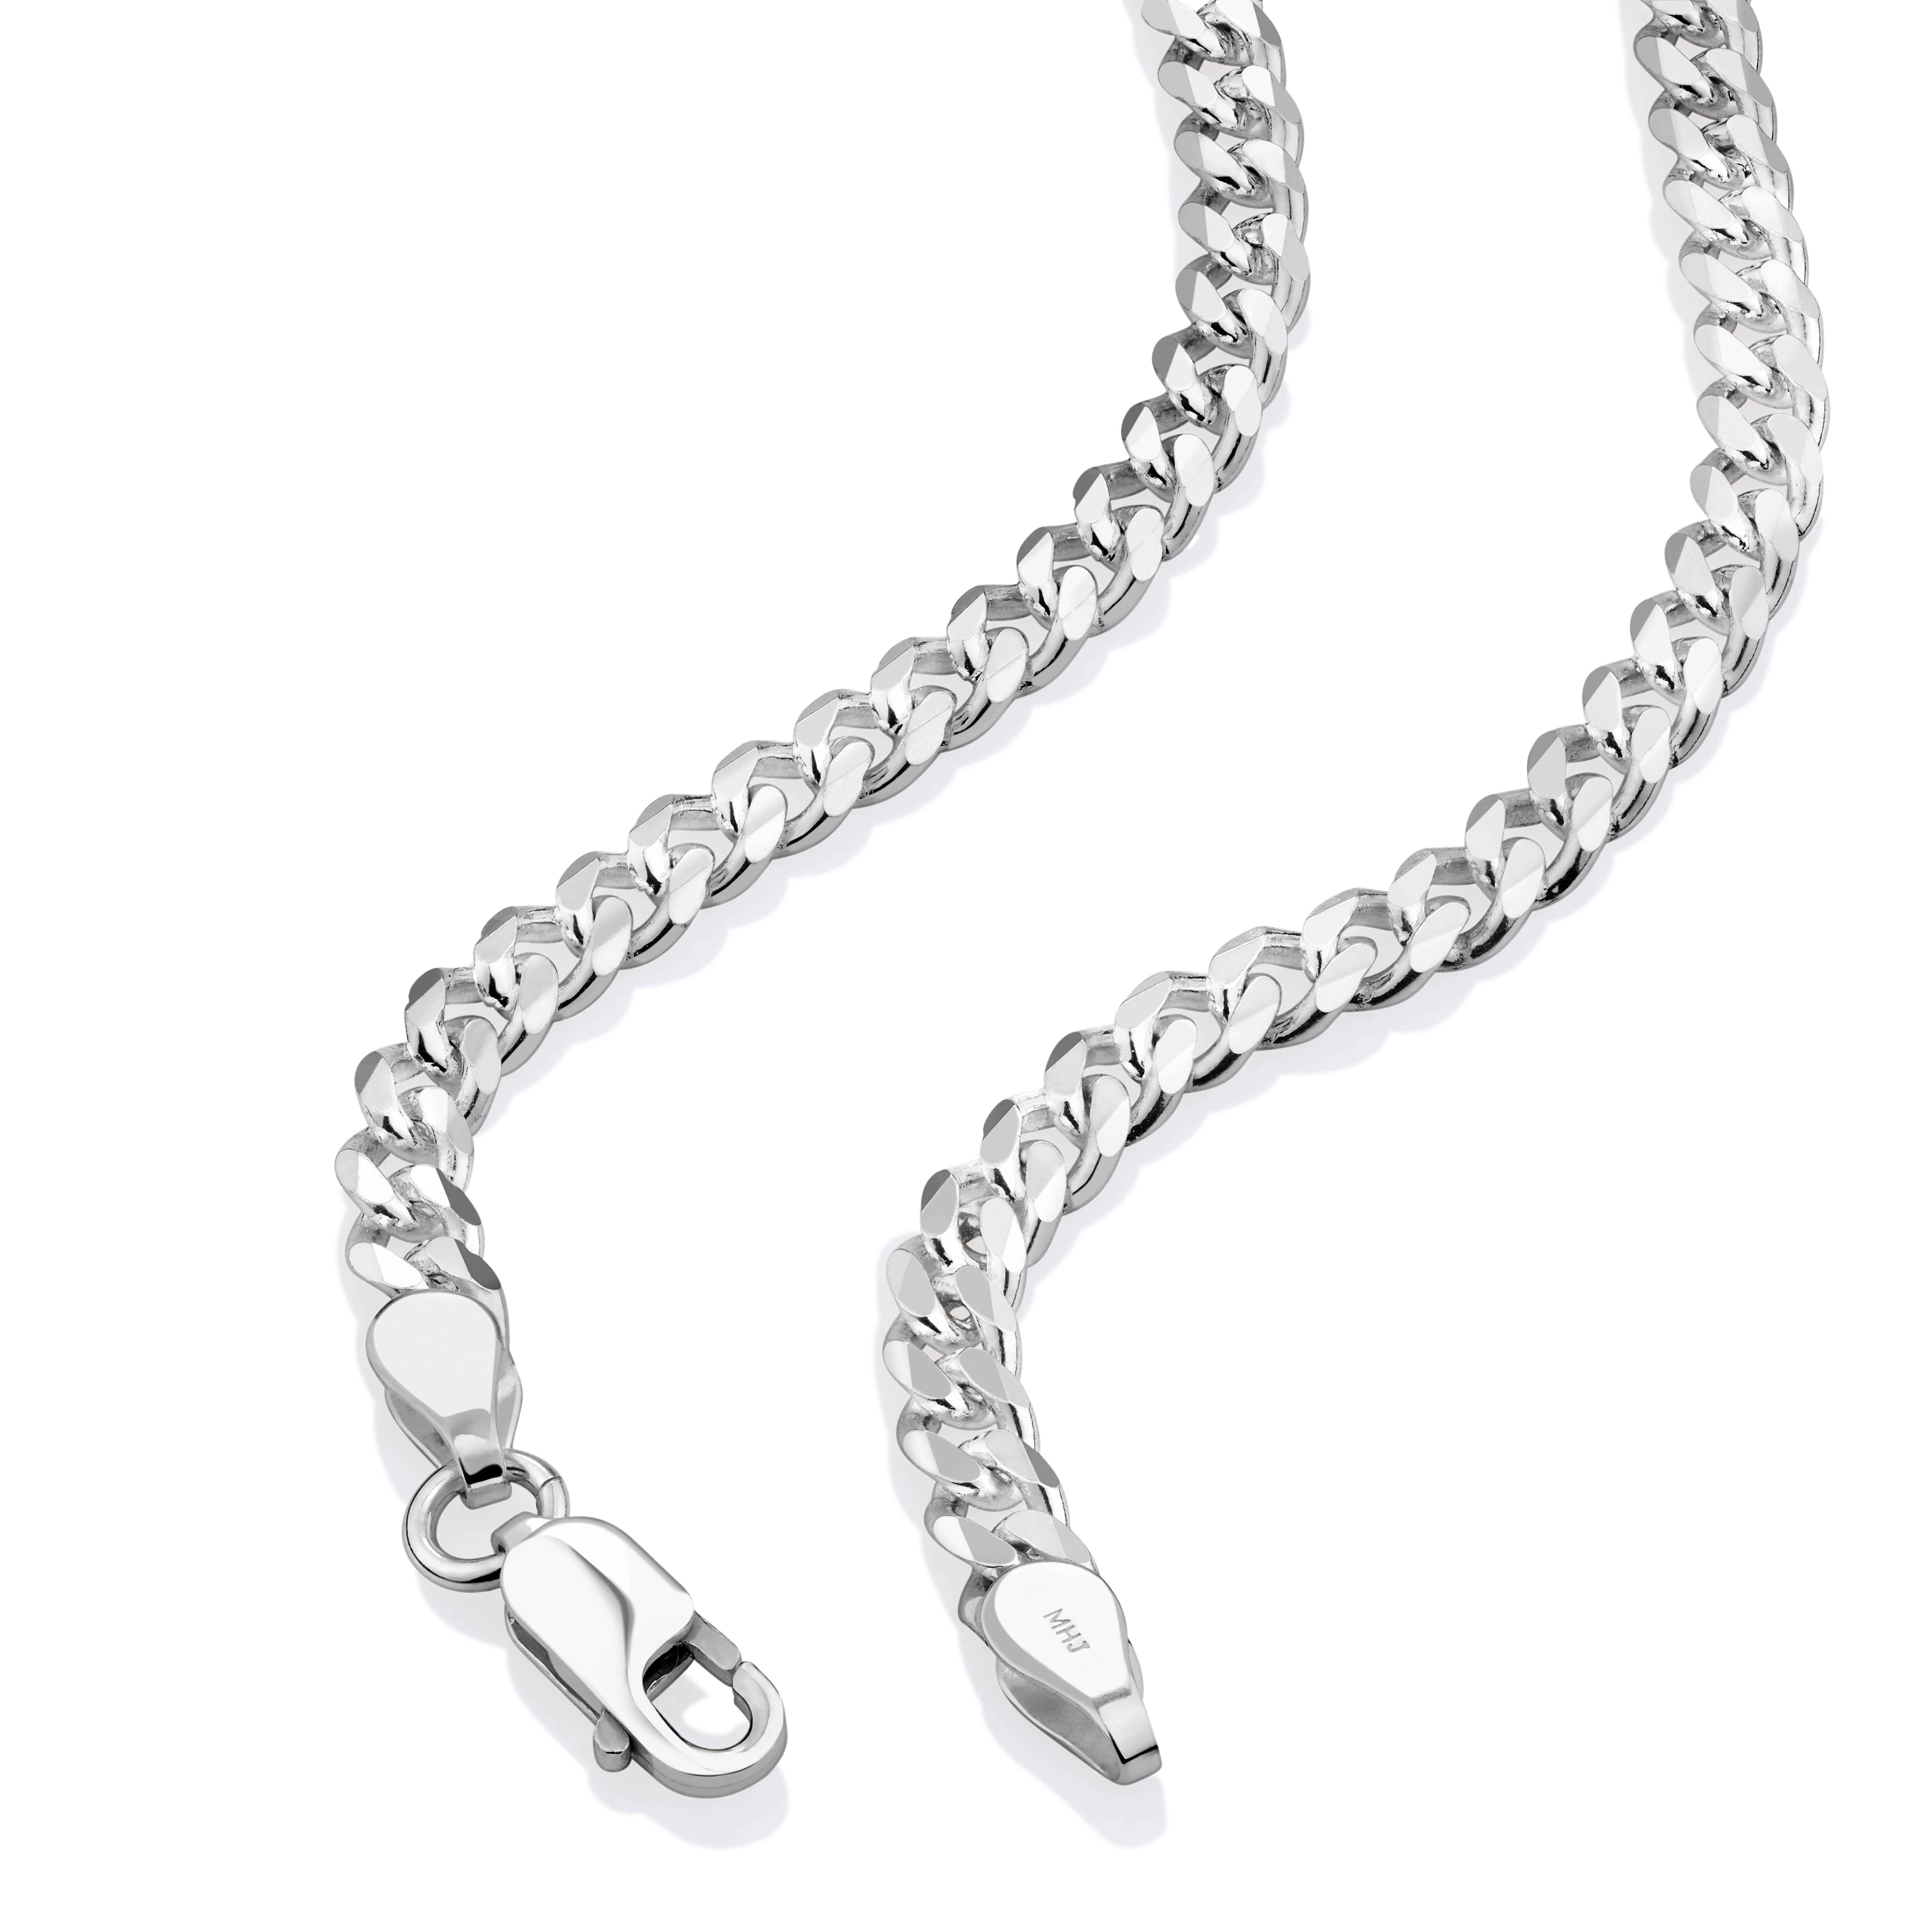 50cm (20") 4mm-4.5mm Width Curb Chain in Sterling Silver